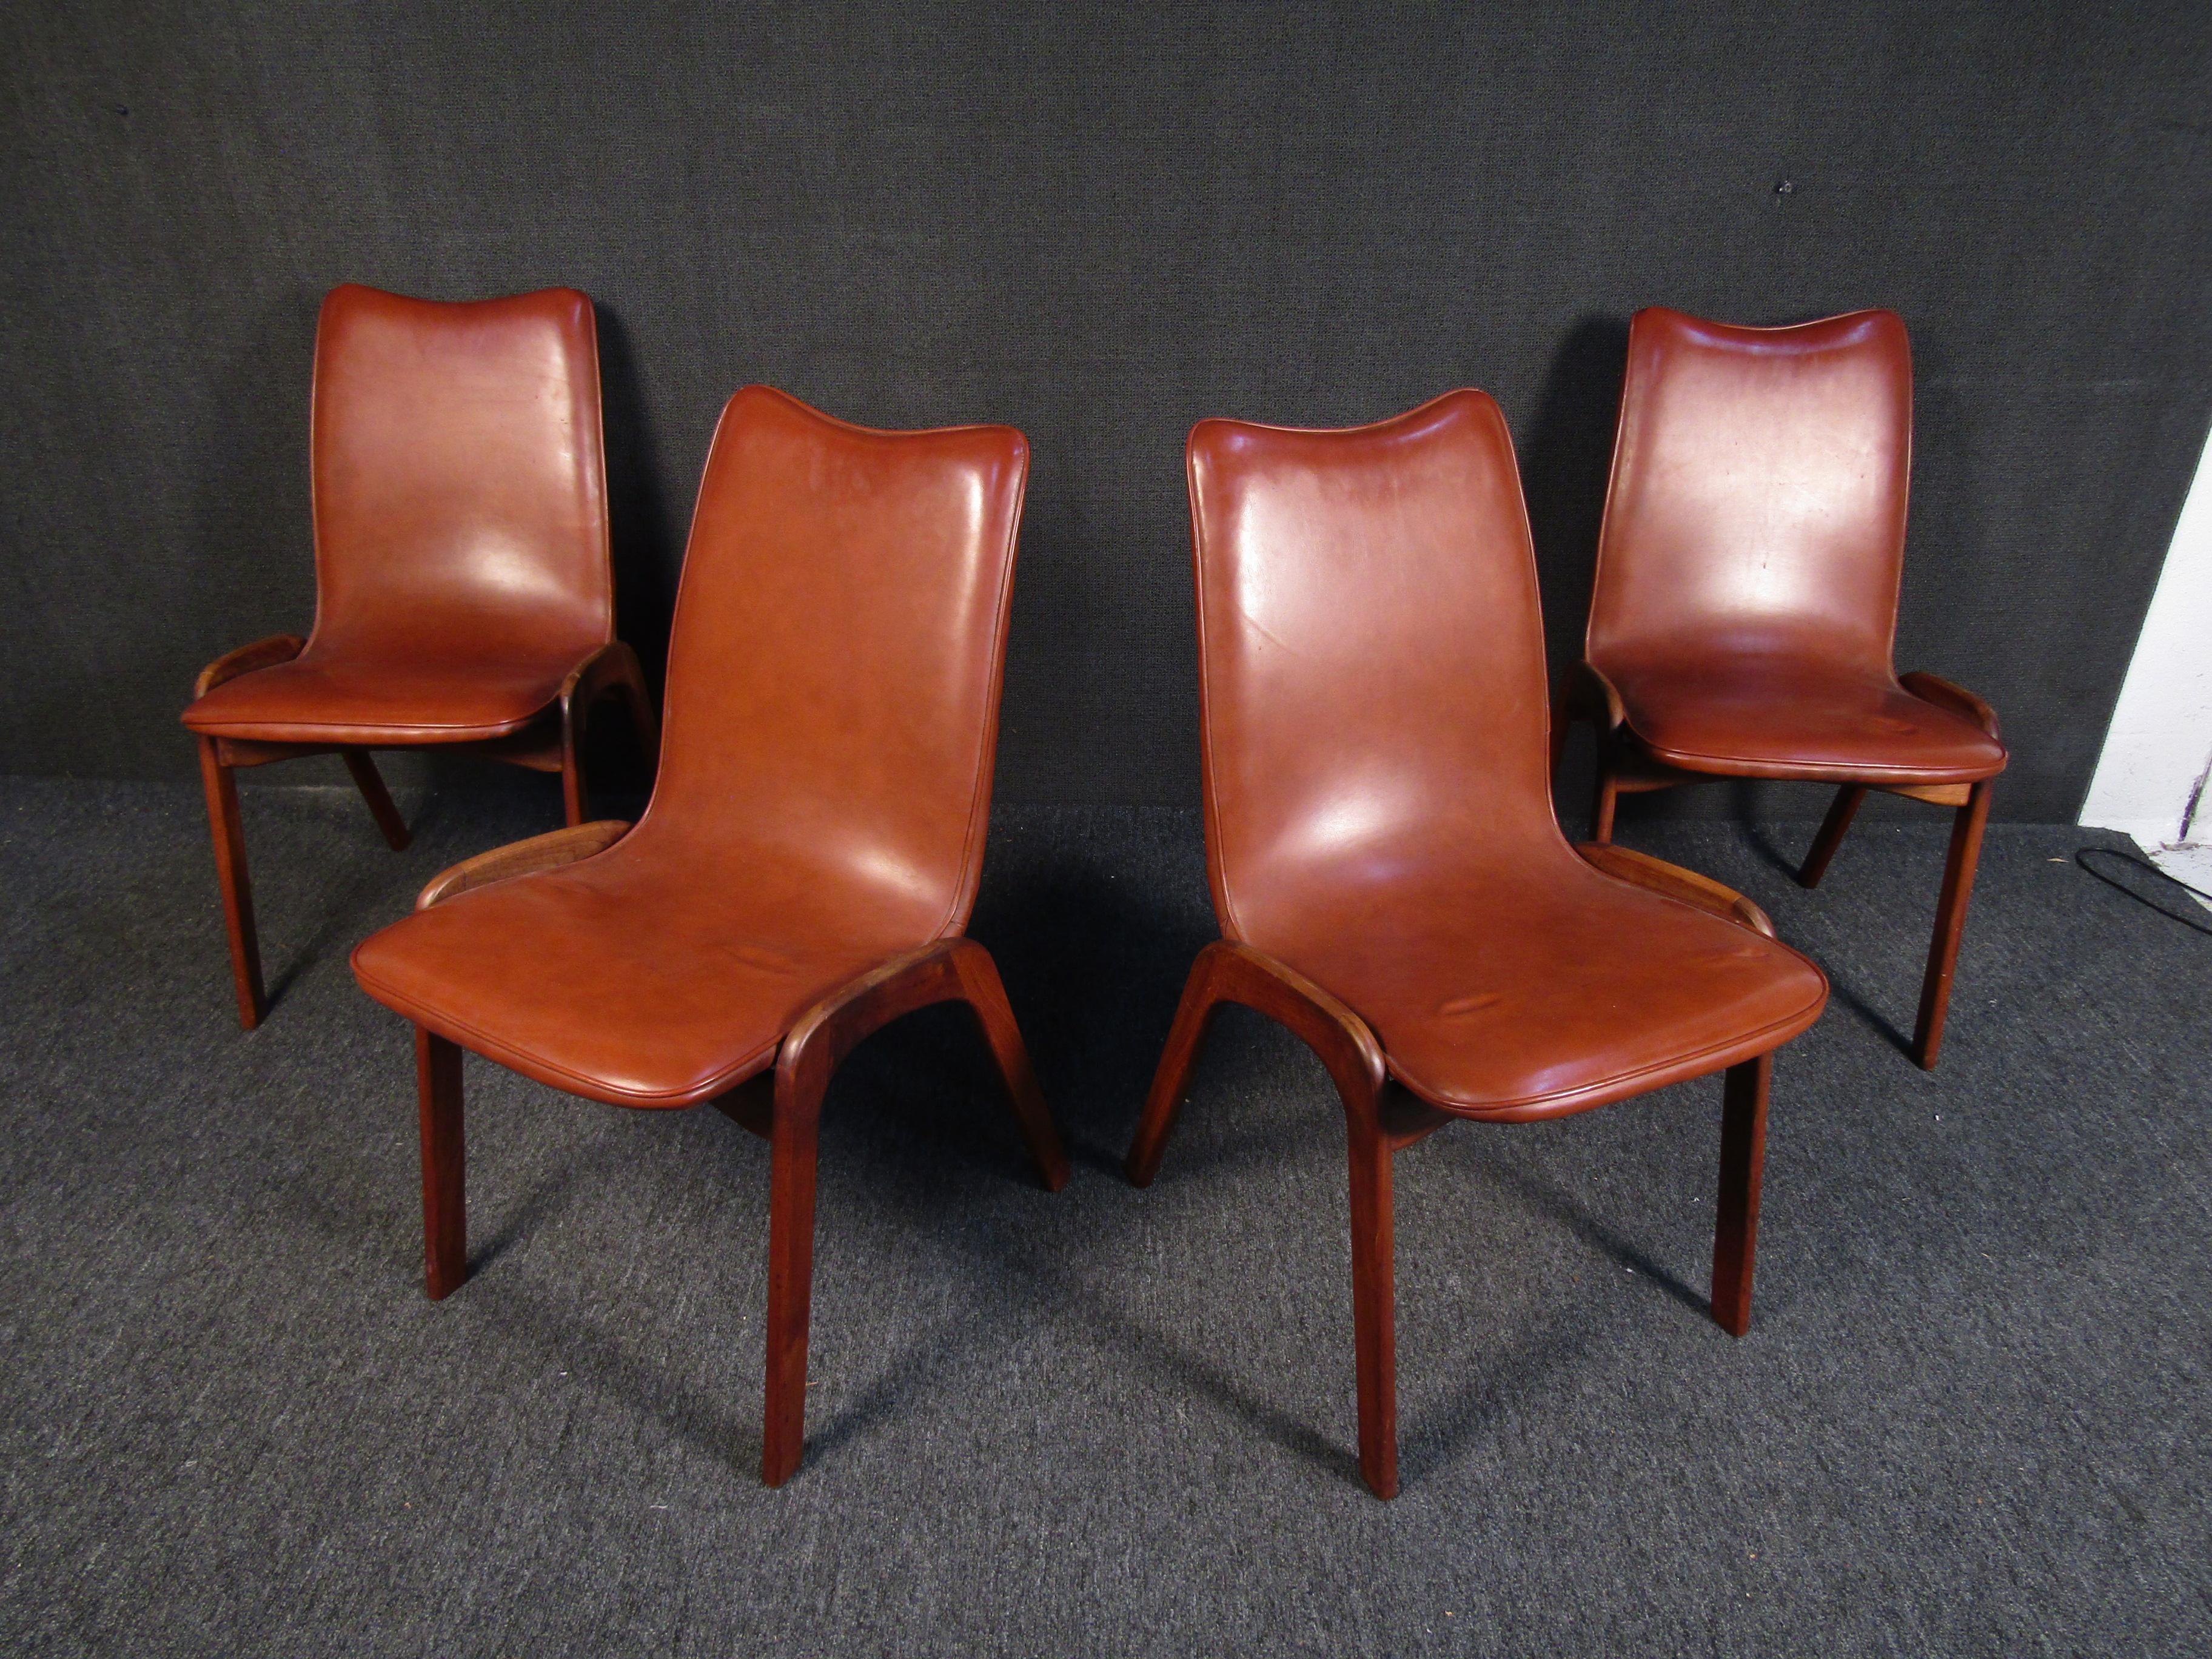 Beautiful set of four mid-century dining chairs designed by Chet Beardsley for California's Living Designs Inc. Atomic-inspired solid walnut legs support a beautifully curved Naugahyde seat. Iconic American mid-century lines are sure to shine in a